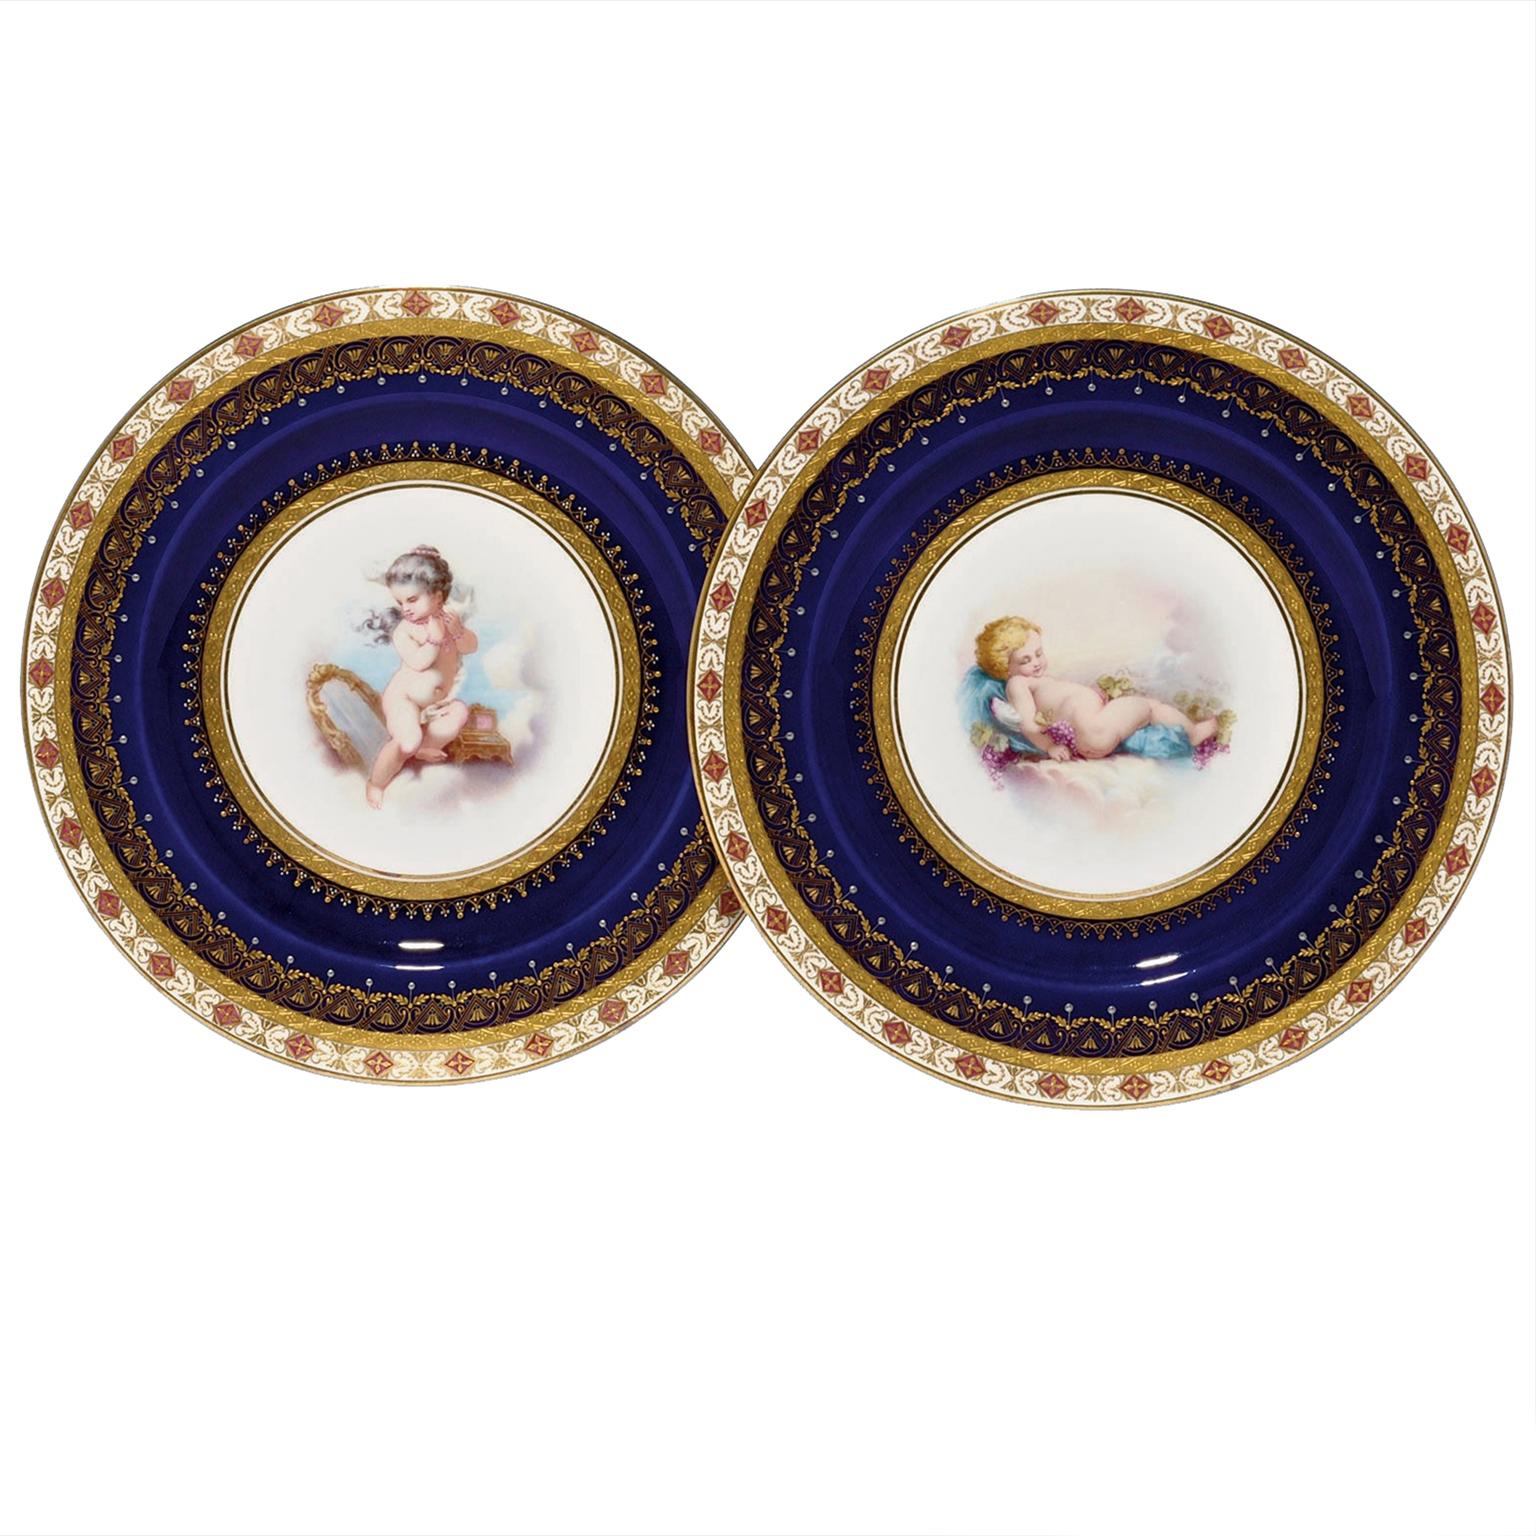 Pair of Porcelain Plates Depicting Putto at Play by Minton, Dated 1881 For Sale